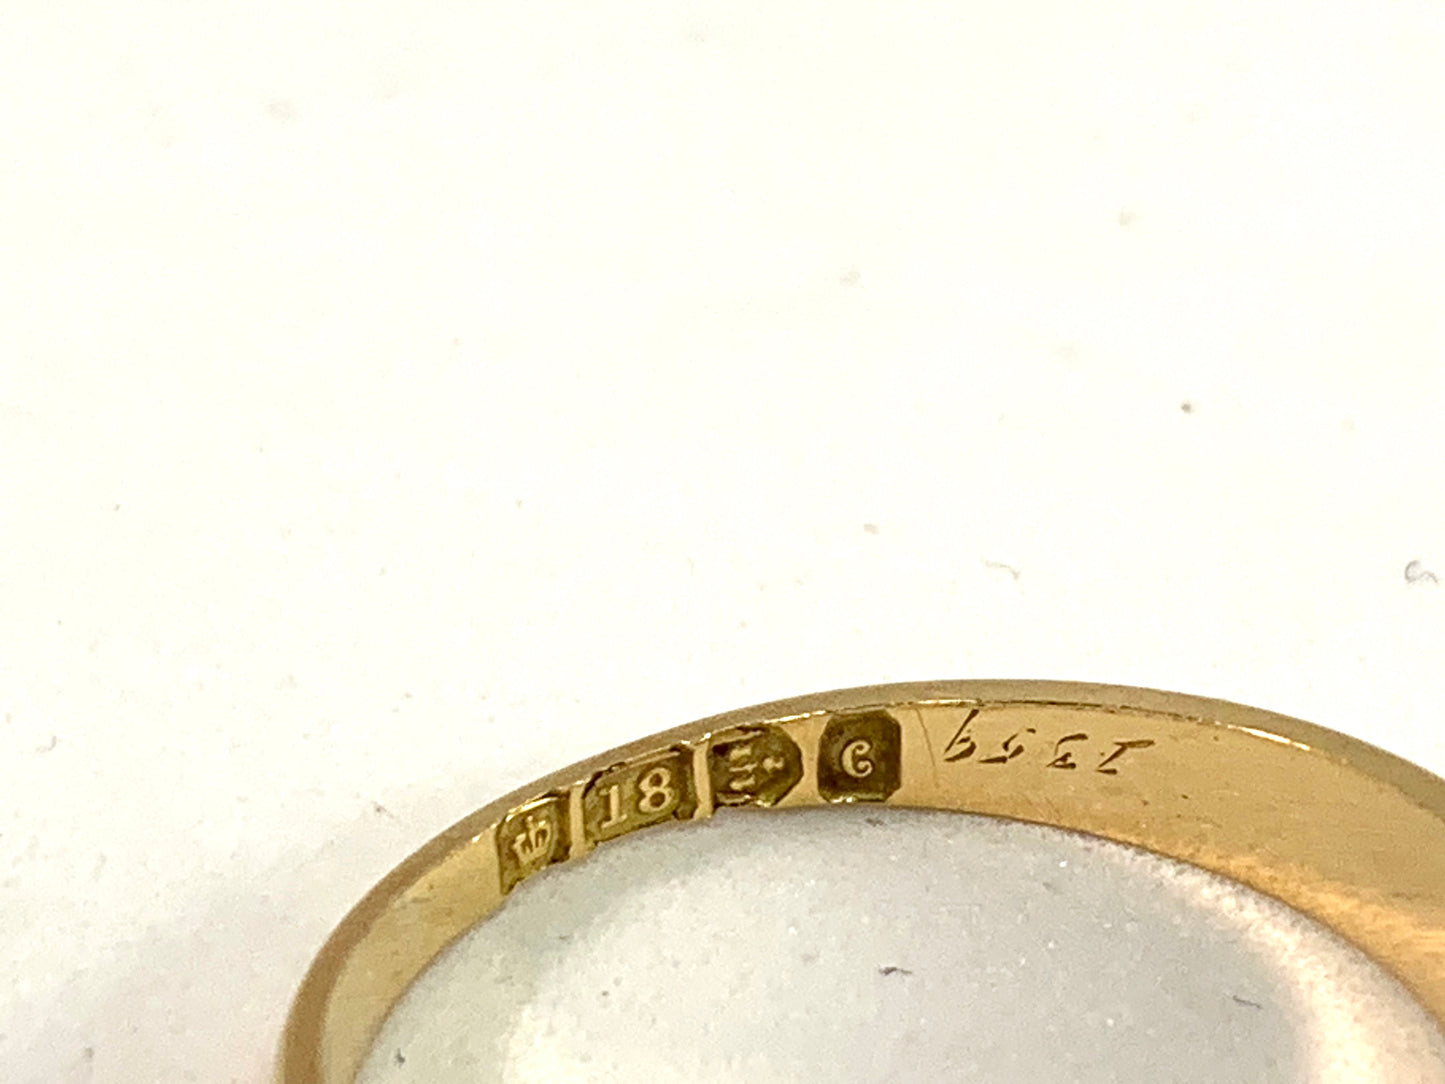 Chester year 1903 Antique Edwardian 18k Gold 0.20ctw Old Cut Diamond Ring.